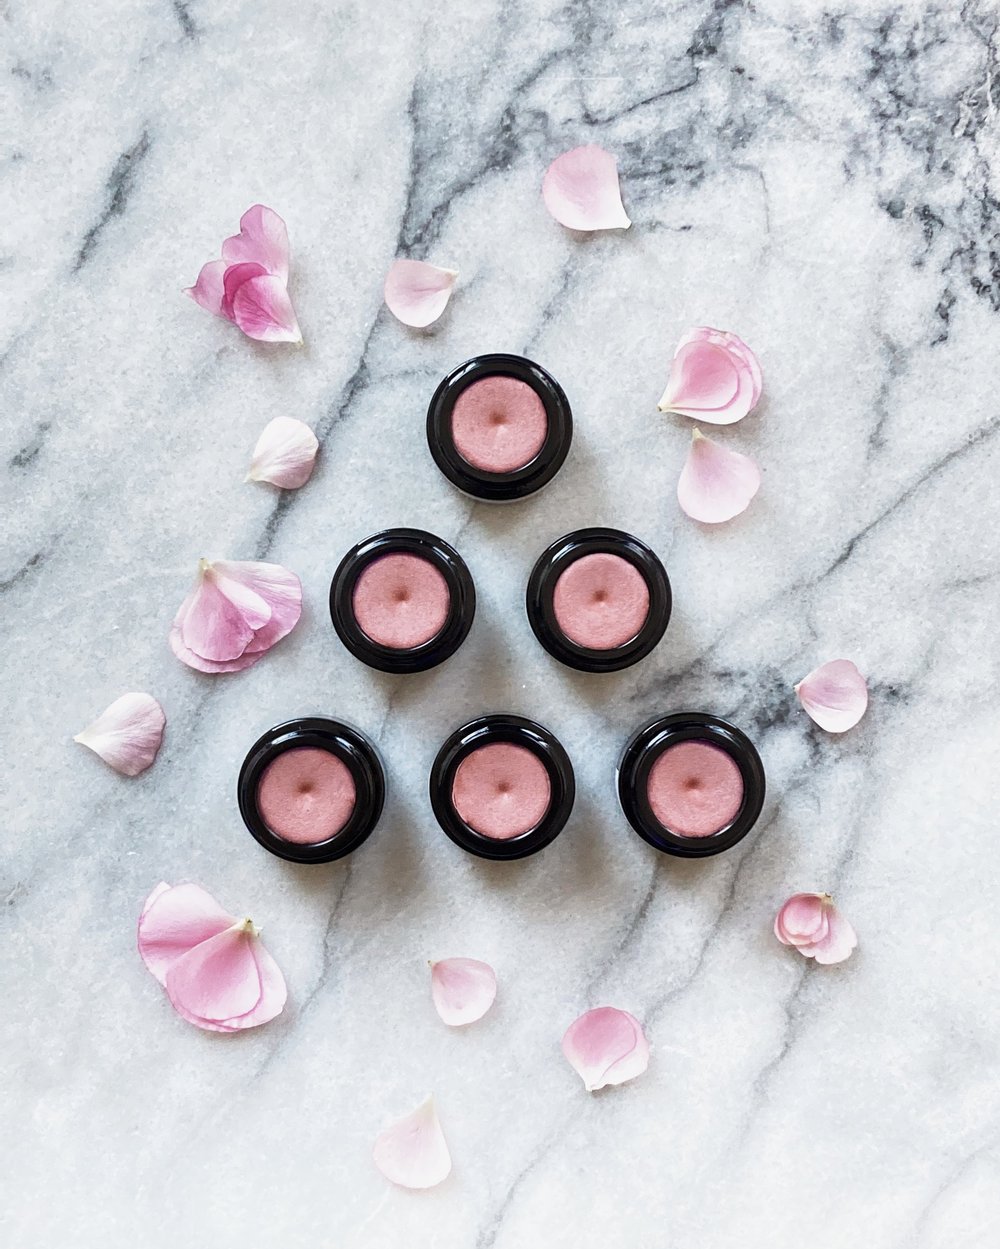 small black jars of pink luminescent shimmer balm arranged in a triangle together with pink flower petals on a white marble surface